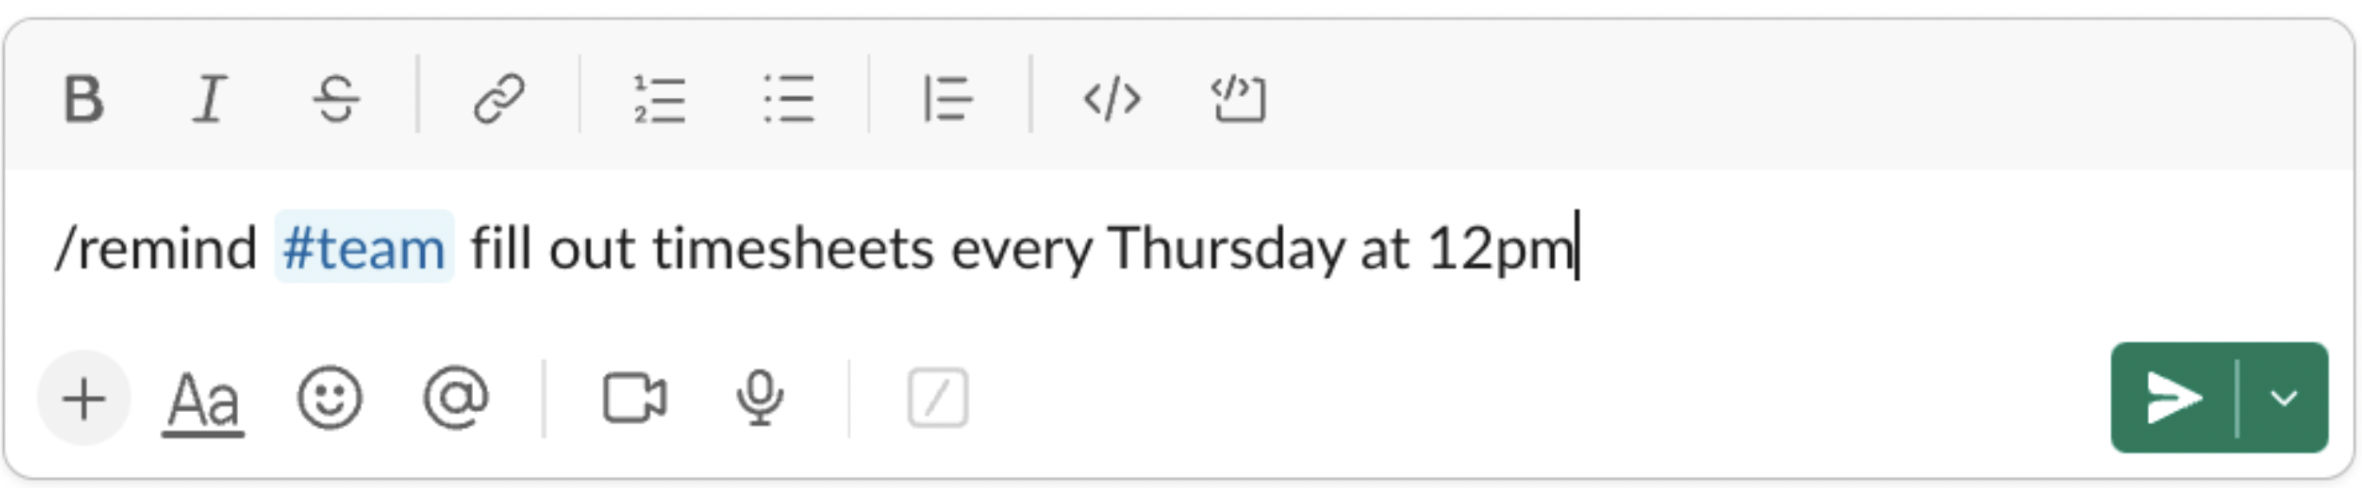 Typing out a team reminder using the /remind function in Slack